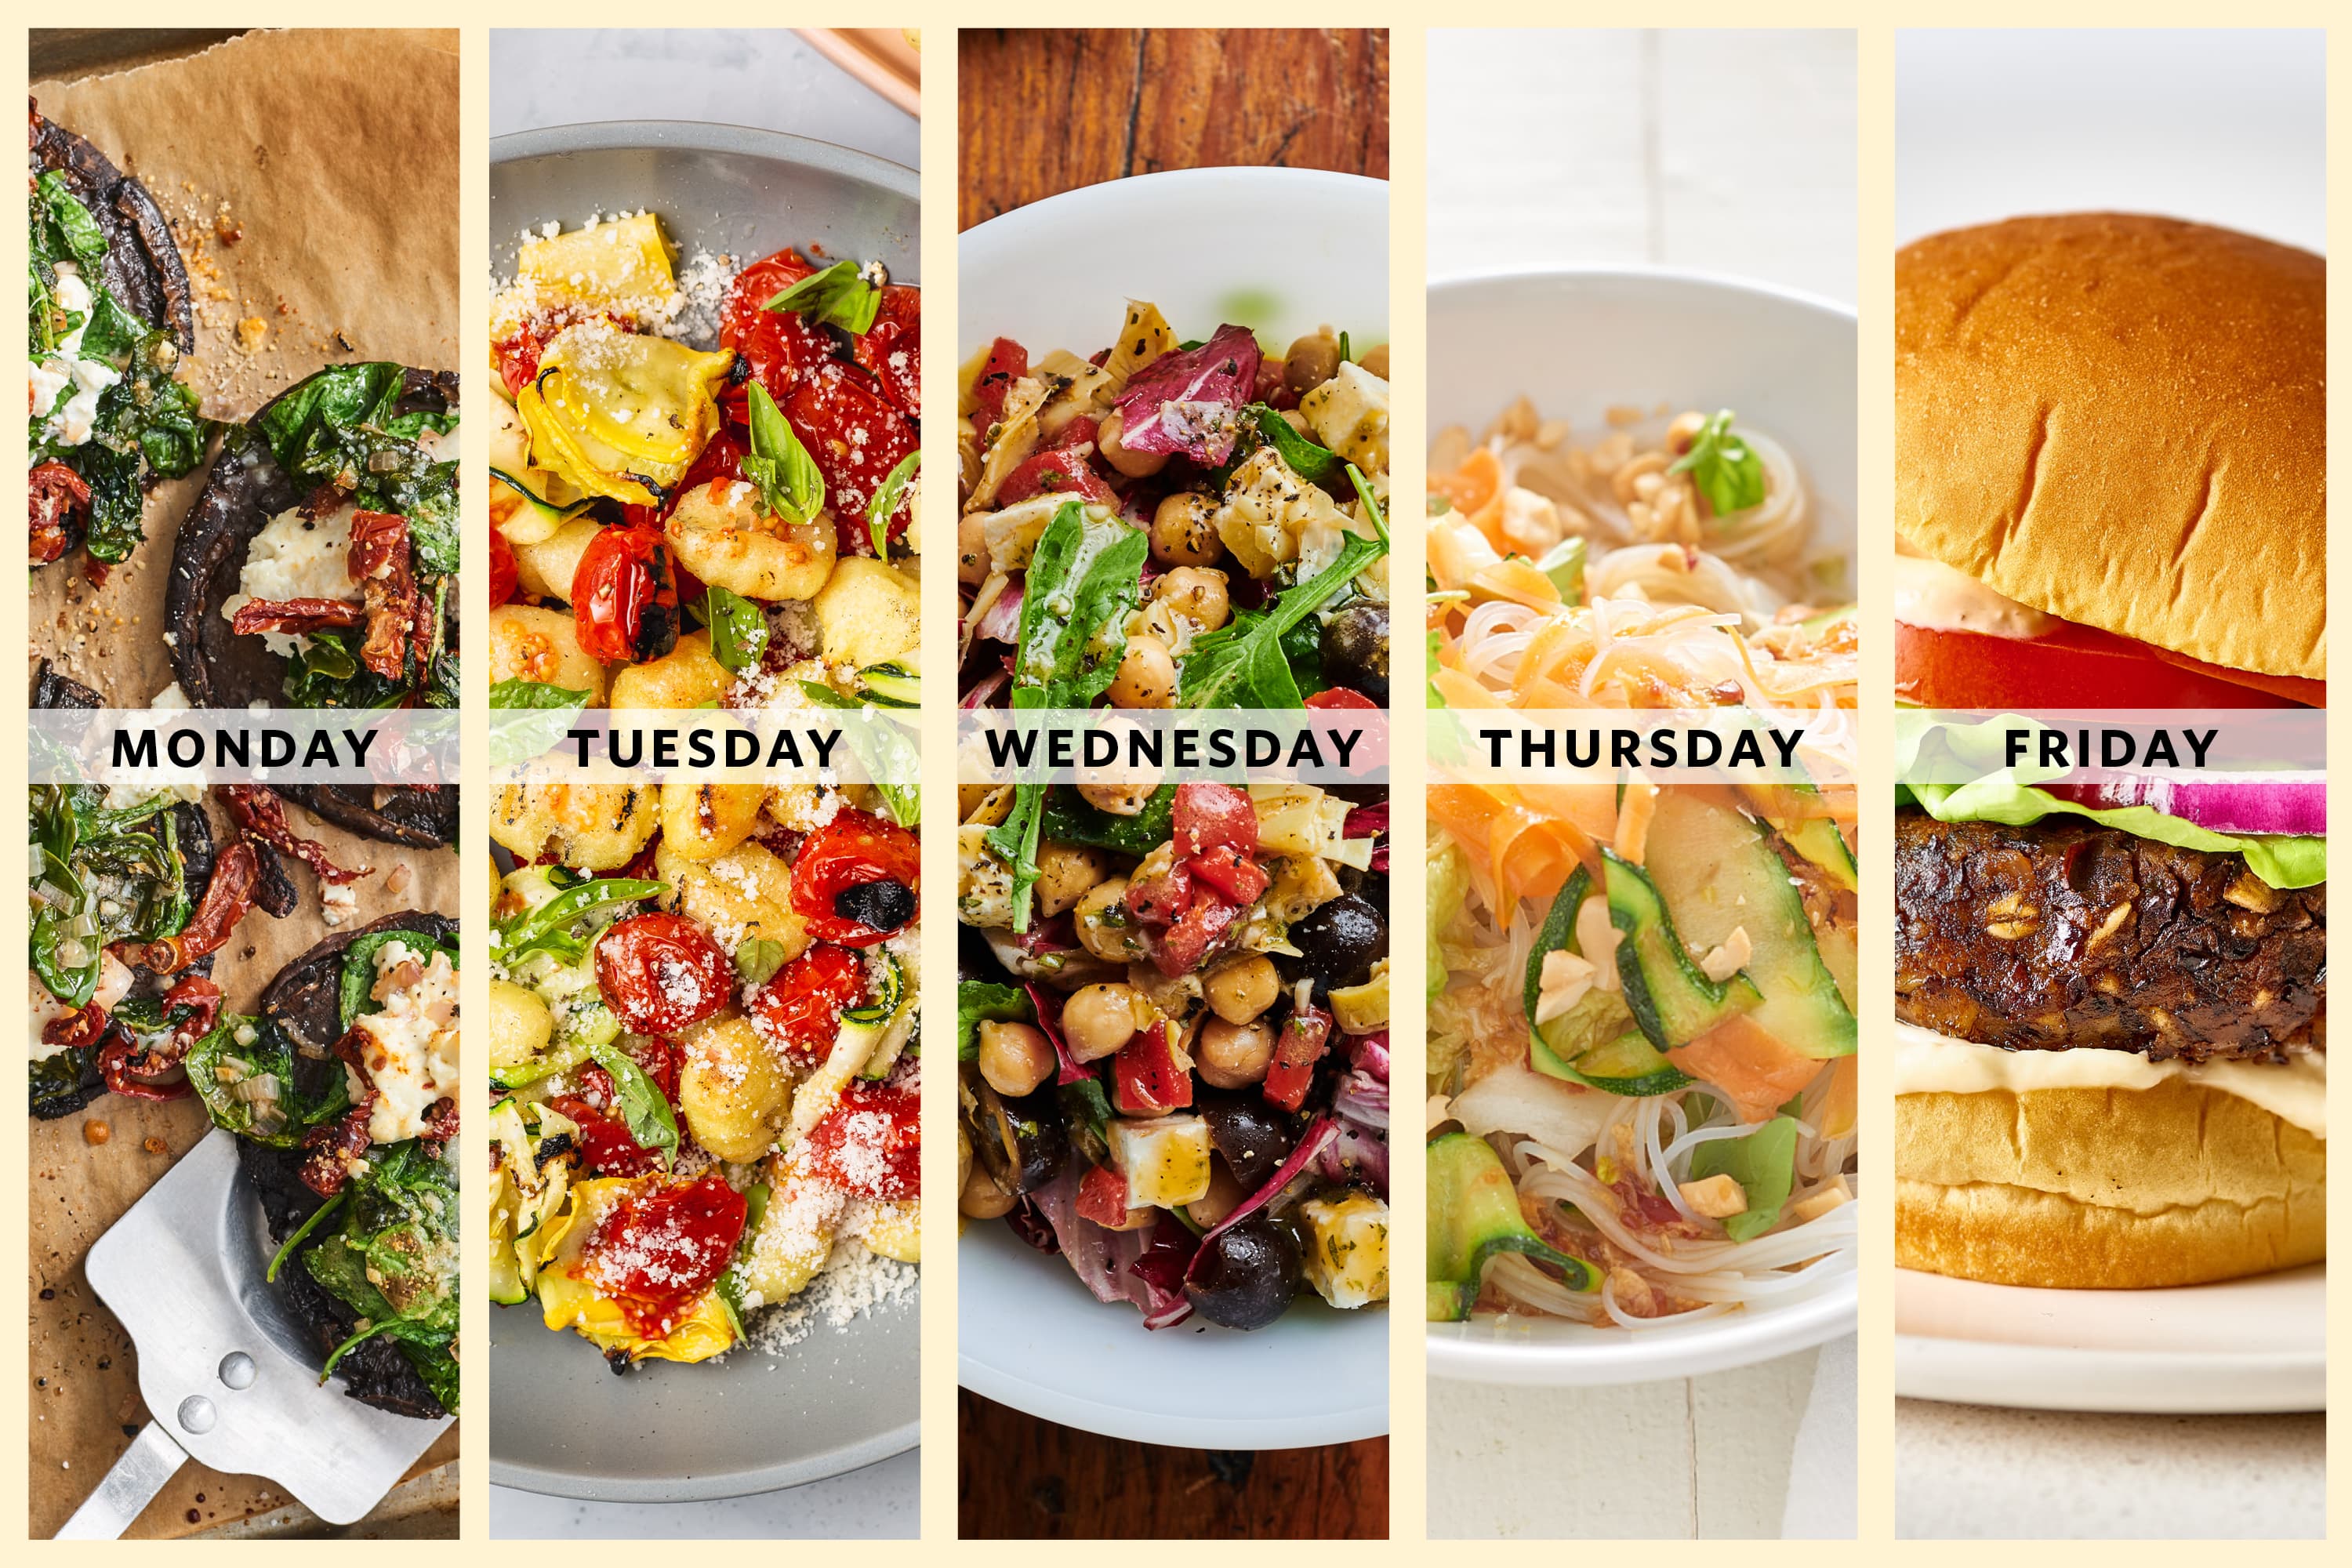 How to Make a Meal Plan for Meatless Monday